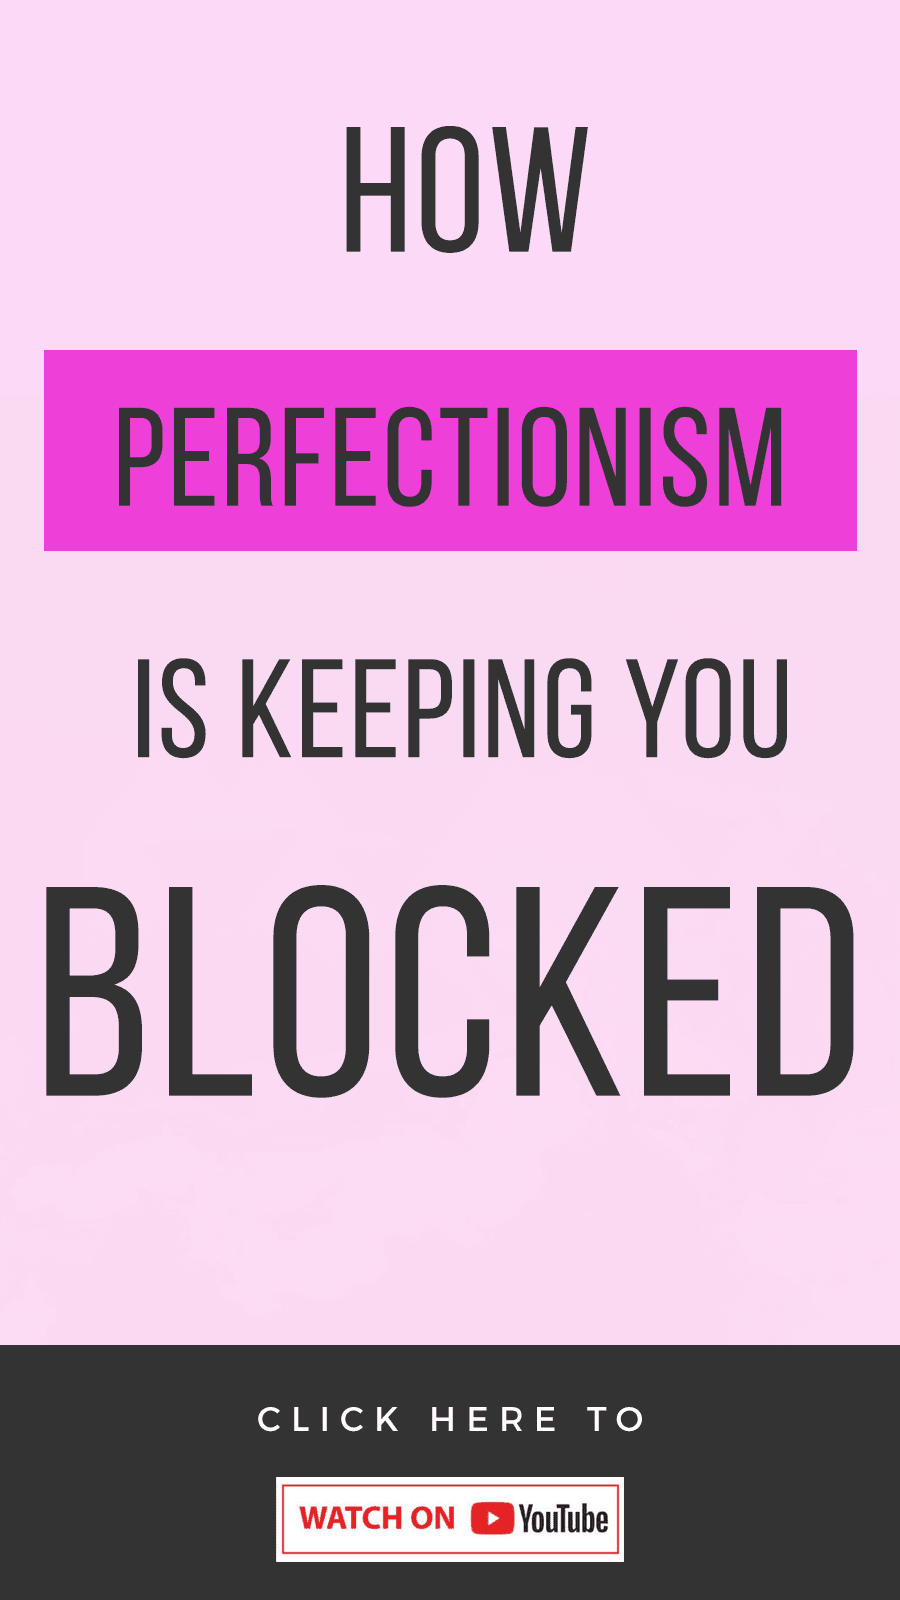 How Perfectionism Is Keeping You Blocked